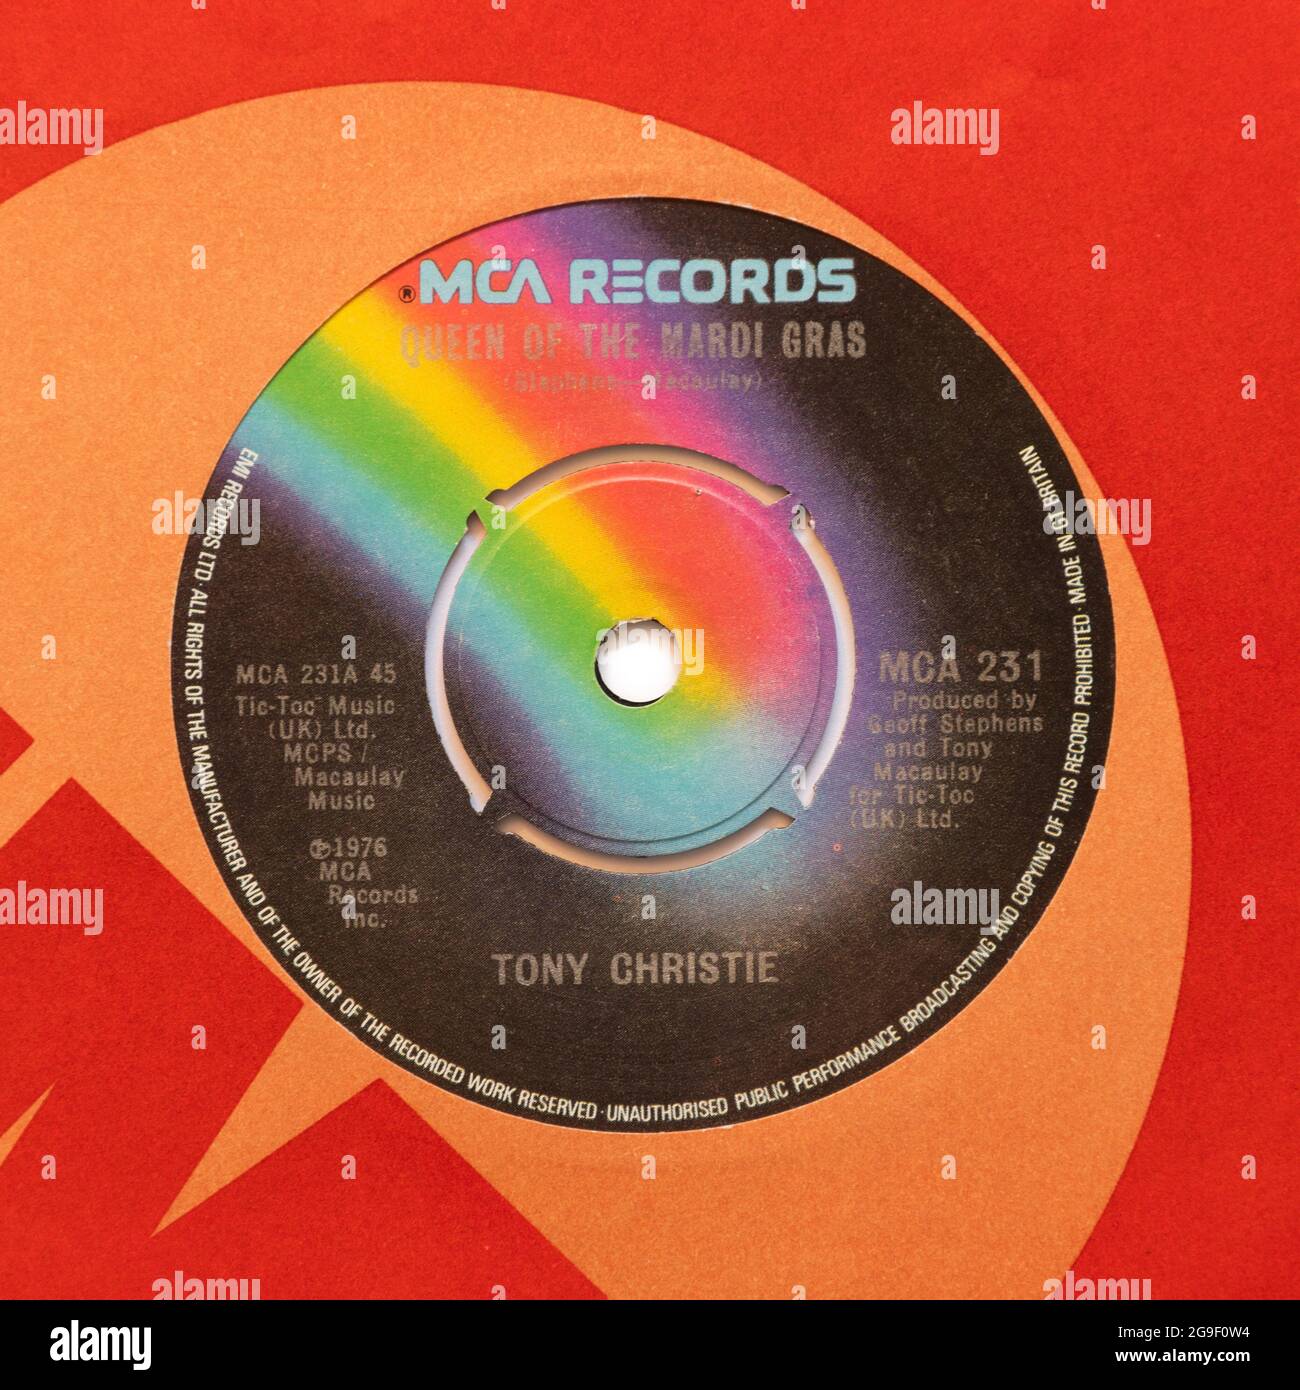 Queen of the Mardi Gras by Tony Christie, a stock photo of the 7' single vinyl 45 rpm record in cover Stock Photo